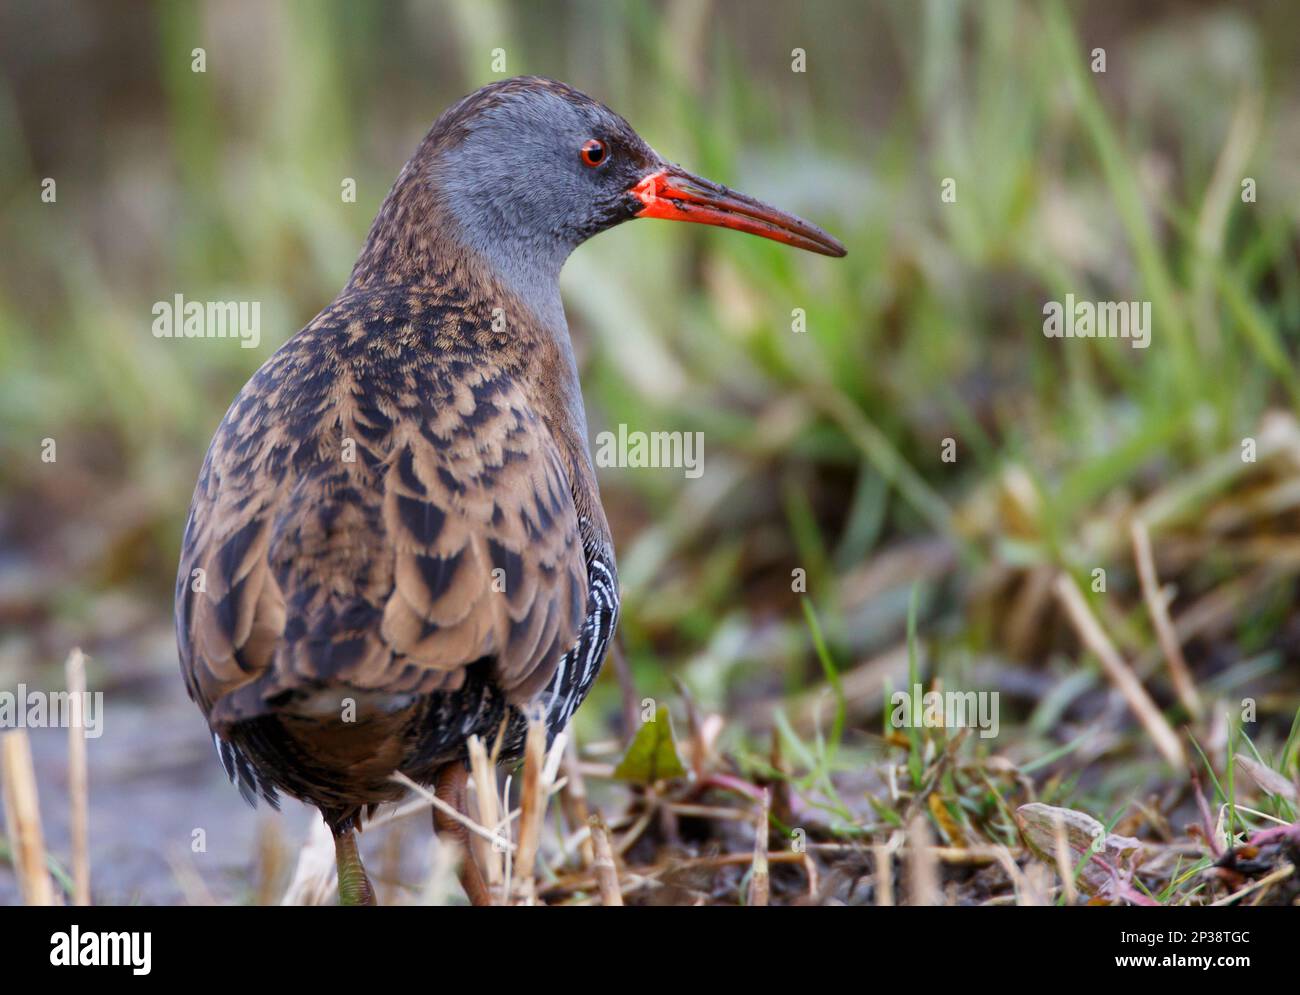 A Water Rail wild bird feeding on small seeds and food in the wetland reeds at RSPB Lakenheath Fen in Norfolk, England Stock Photo